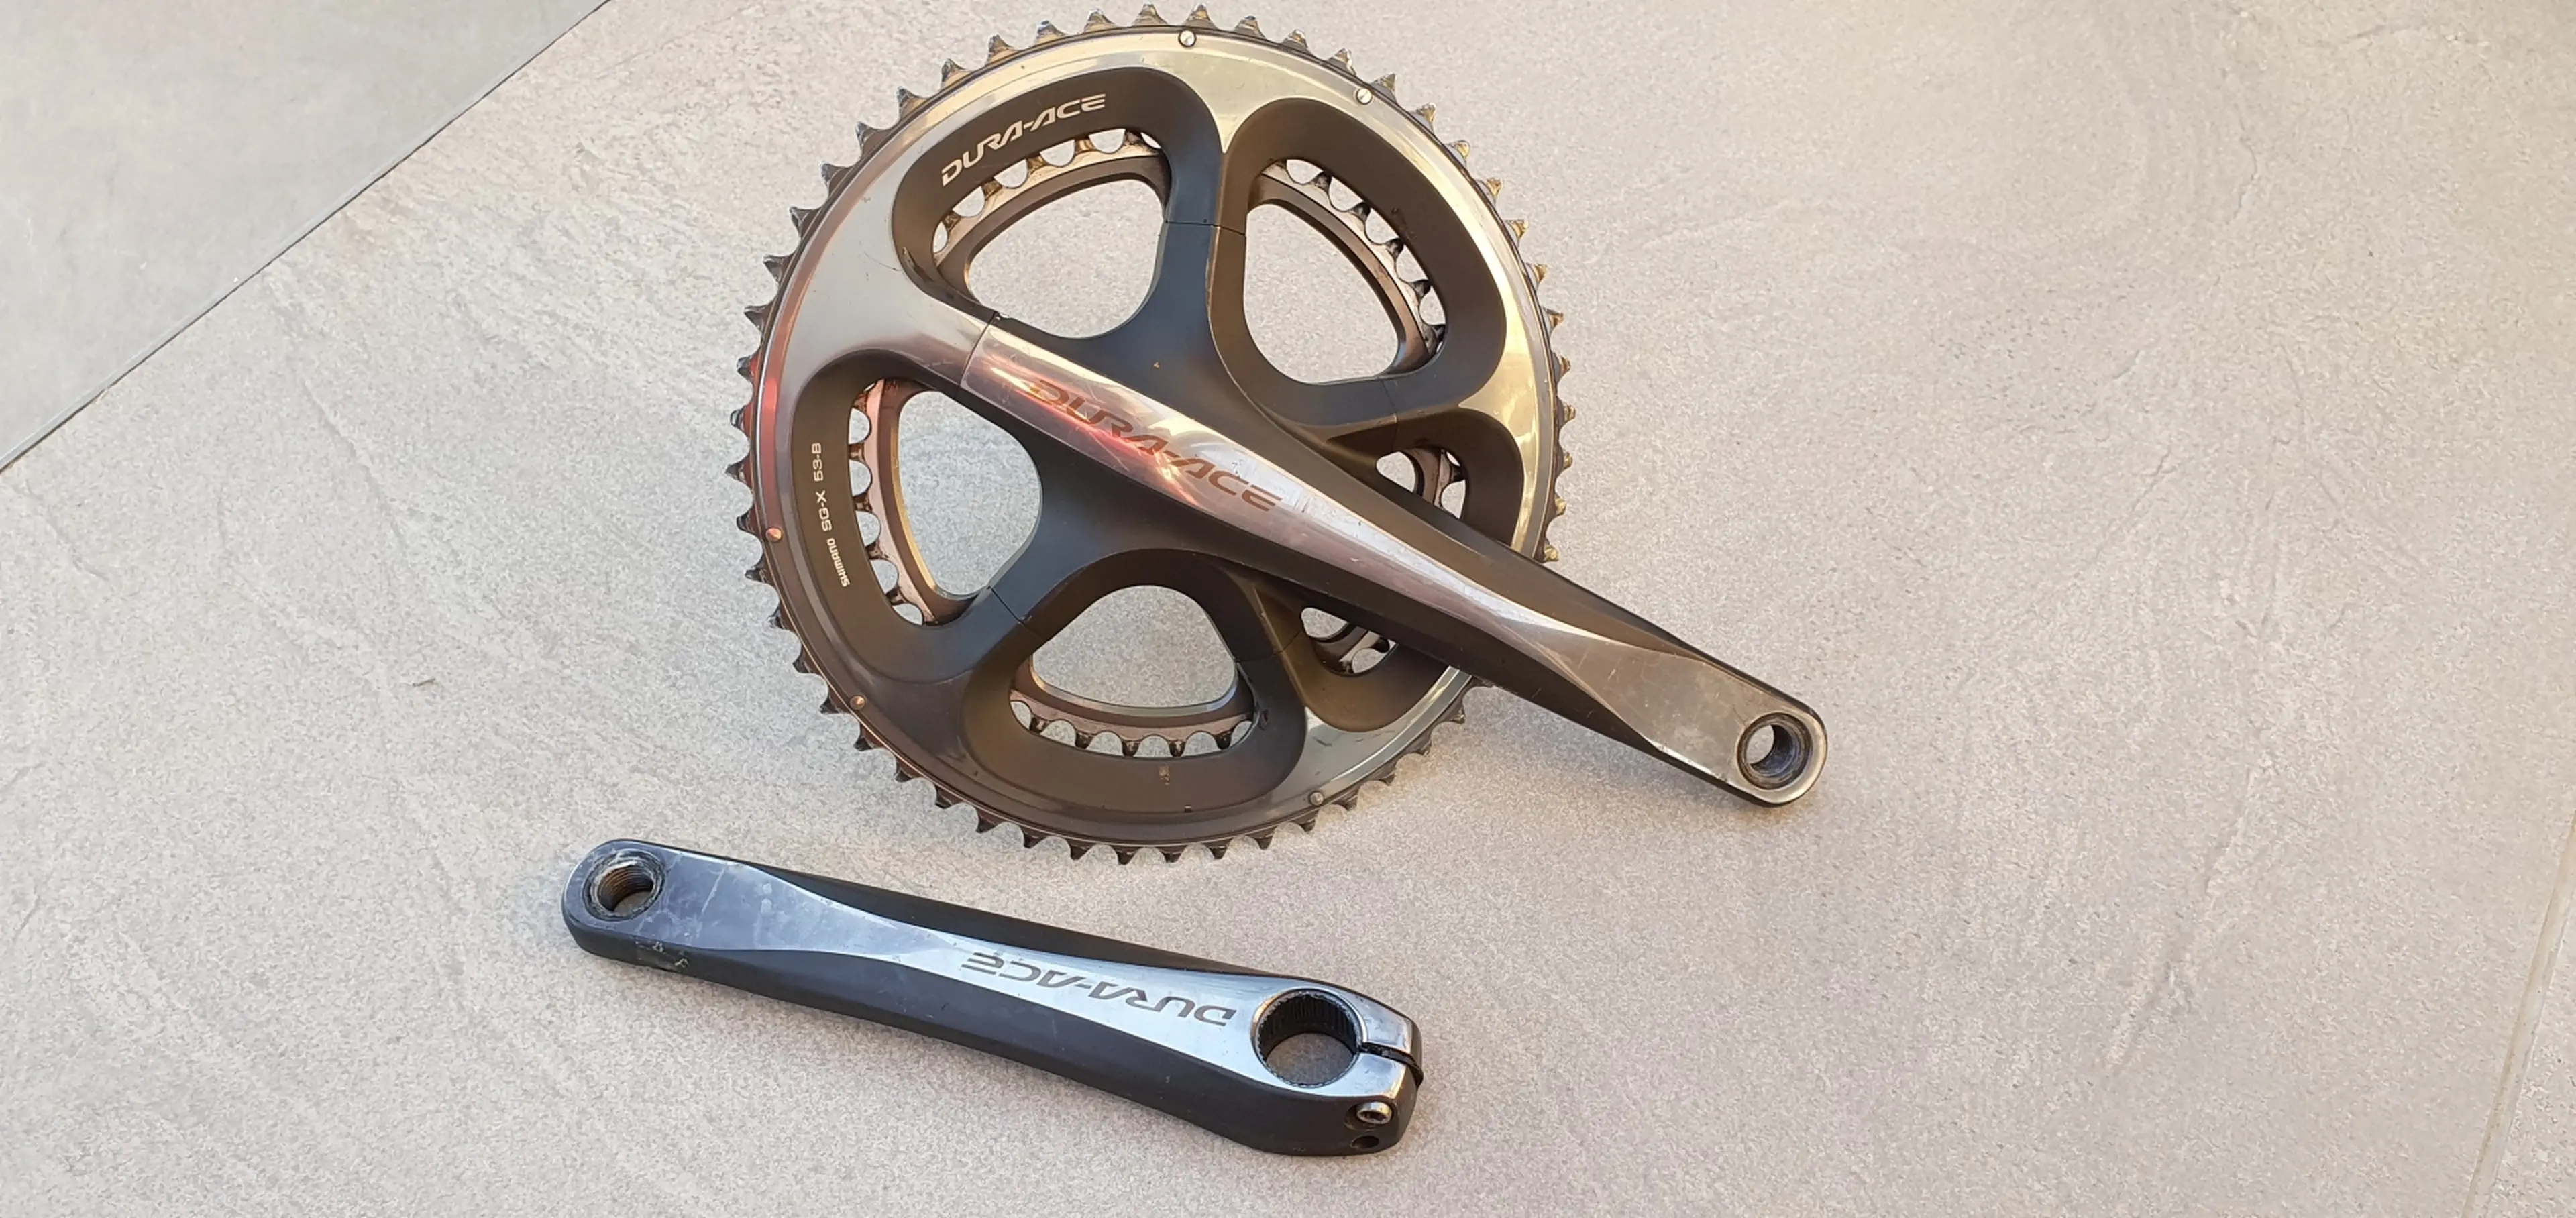 2. Pedalier Shimano Dura-Ace FC-7900 53x39T 175mm